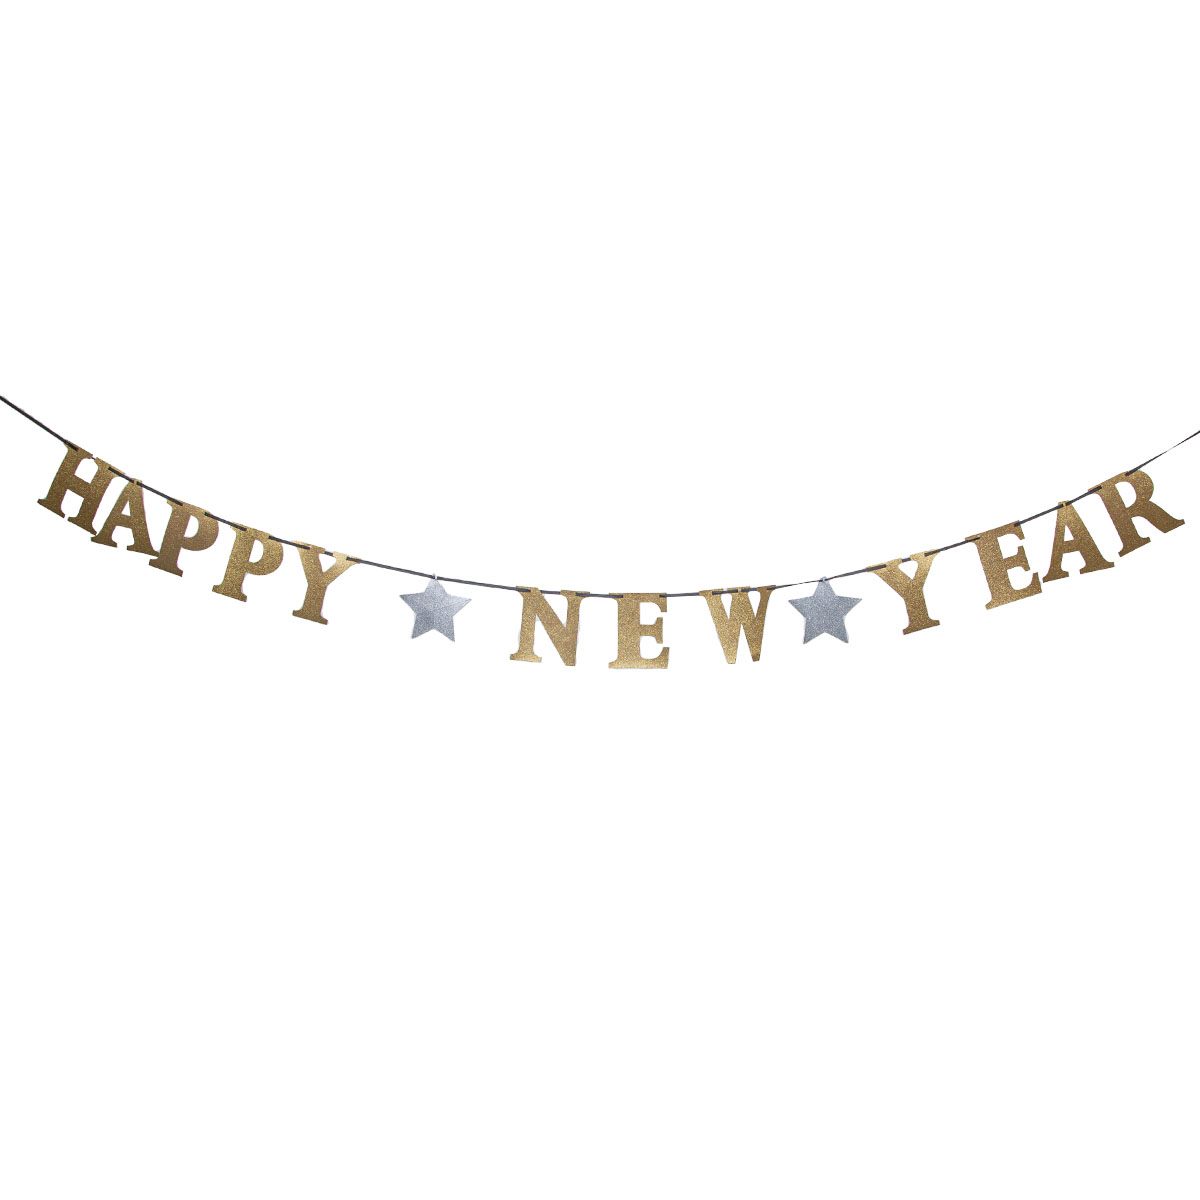 Girlang, happy new year guld 360x13 cm